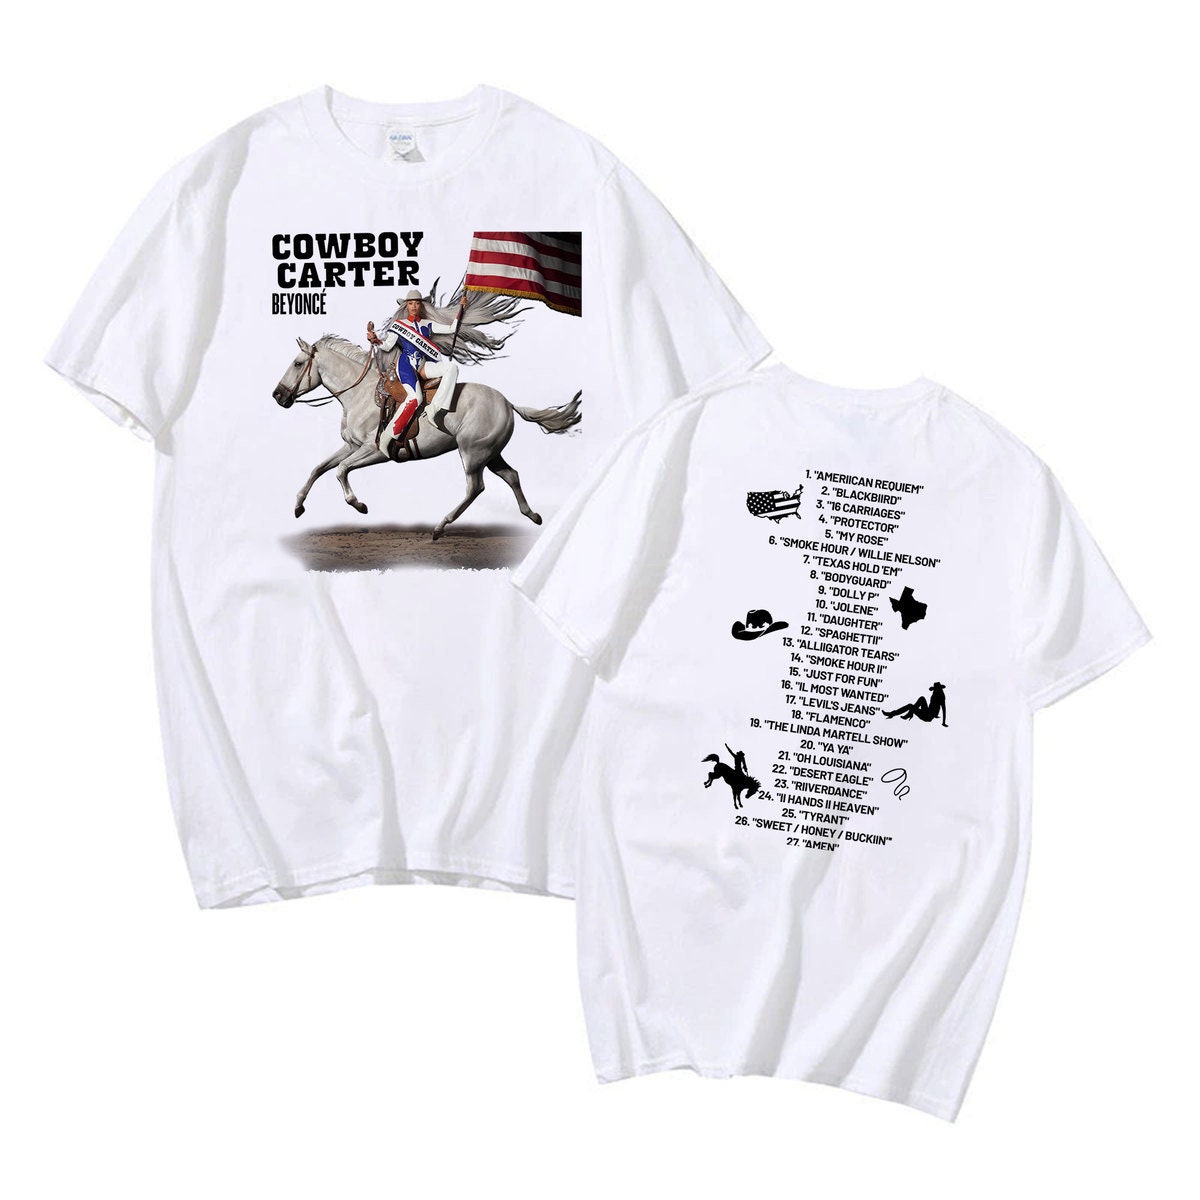 Cowboy Carter Tracklist Shirt, Beyoncee Act II Double Sided Unisex Shirt